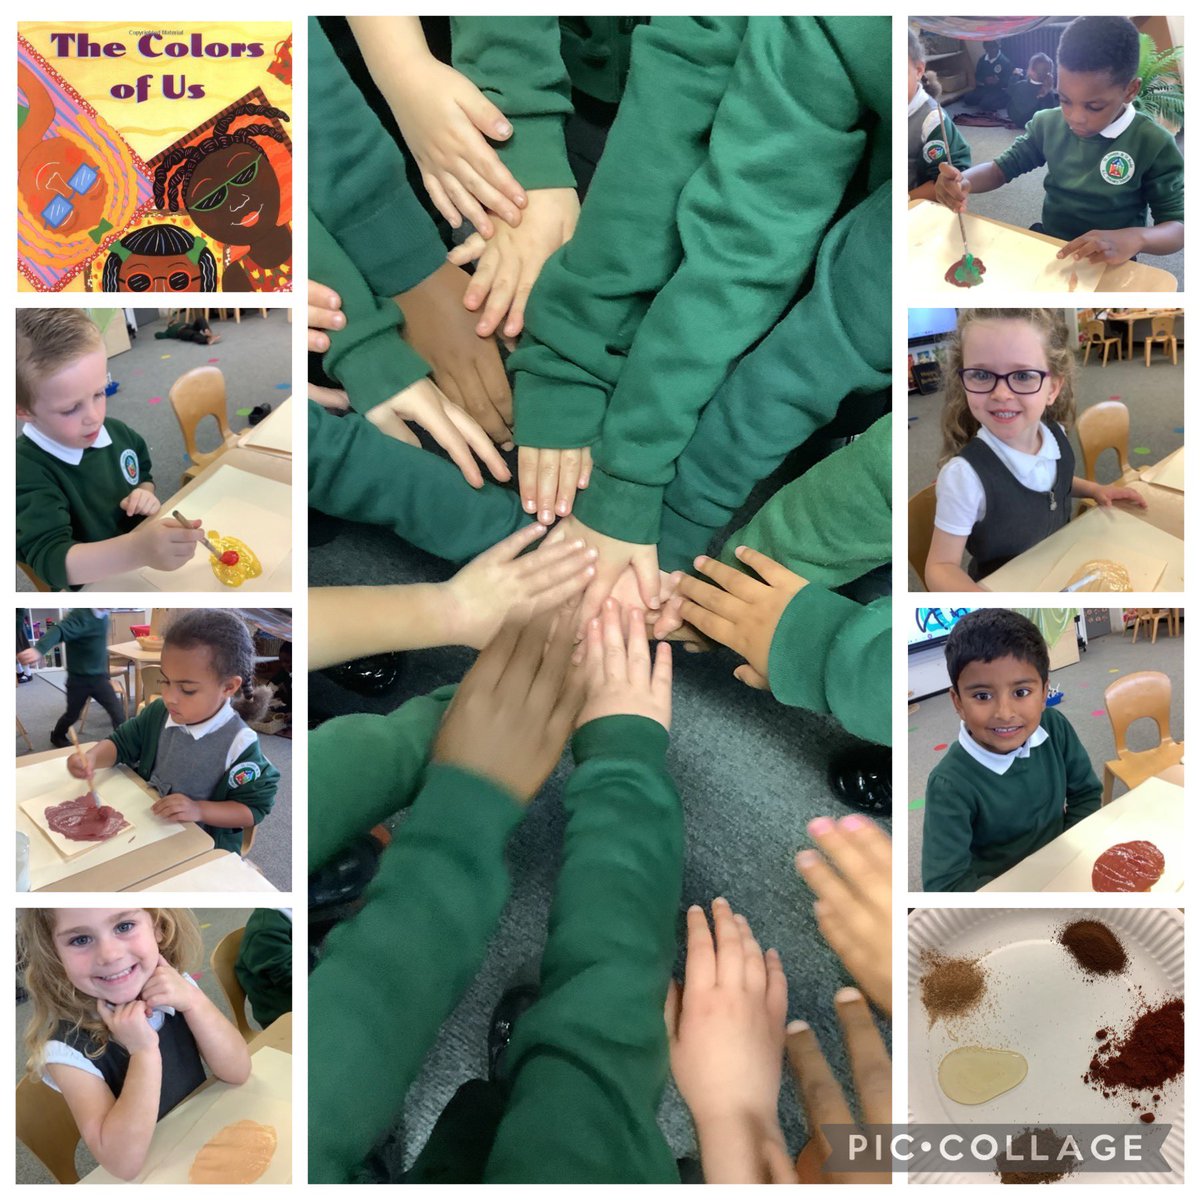 For Black History Month, Reception have been thinking about our skin colour. After reading ‘The Colours of Us’ we were inspired by the main character, Lena, to mix paint to create our own skin colour. #sjsbhistory